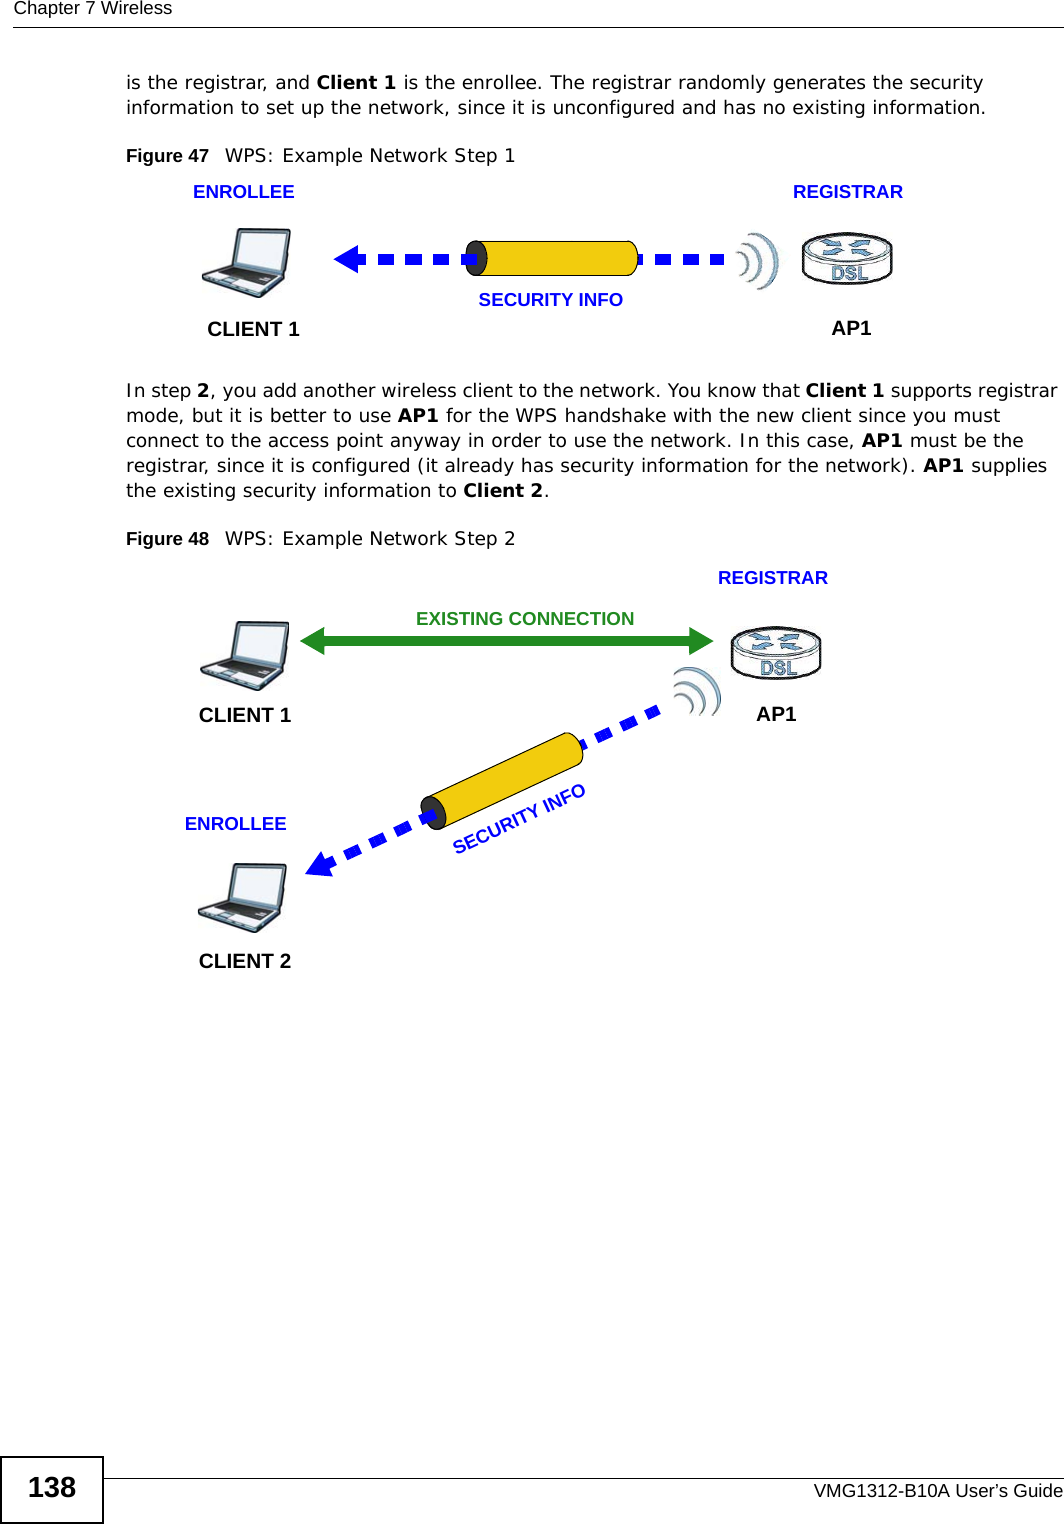 Chapter 7 WirelessVMG1312-B10A User’s Guide138is the registrar, and Client 1 is the enrollee. The registrar randomly generates the security information to set up the network, since it is unconfigured and has no existing information.Figure 47   WPS: Example Network Step 1In step 2, you add another wireless client to the network. You know that Client 1 supports registrar mode, but it is better to use AP1 for the WPS handshake with the new client since you must connect to the access point anyway in order to use the network. In this case, AP1 must be the registrar, since it is configured (it already has security information for the network). AP1 supplies the existing security information to Client 2.Figure 48   WPS: Example Network Step 2REGISTRARENROLLEESECURITY INFOCLIENT 1 AP1REGISTRARCLIENT 1 AP1ENROLLEECLIENT 2EXISTING CONNECTIONSECURITY INFO